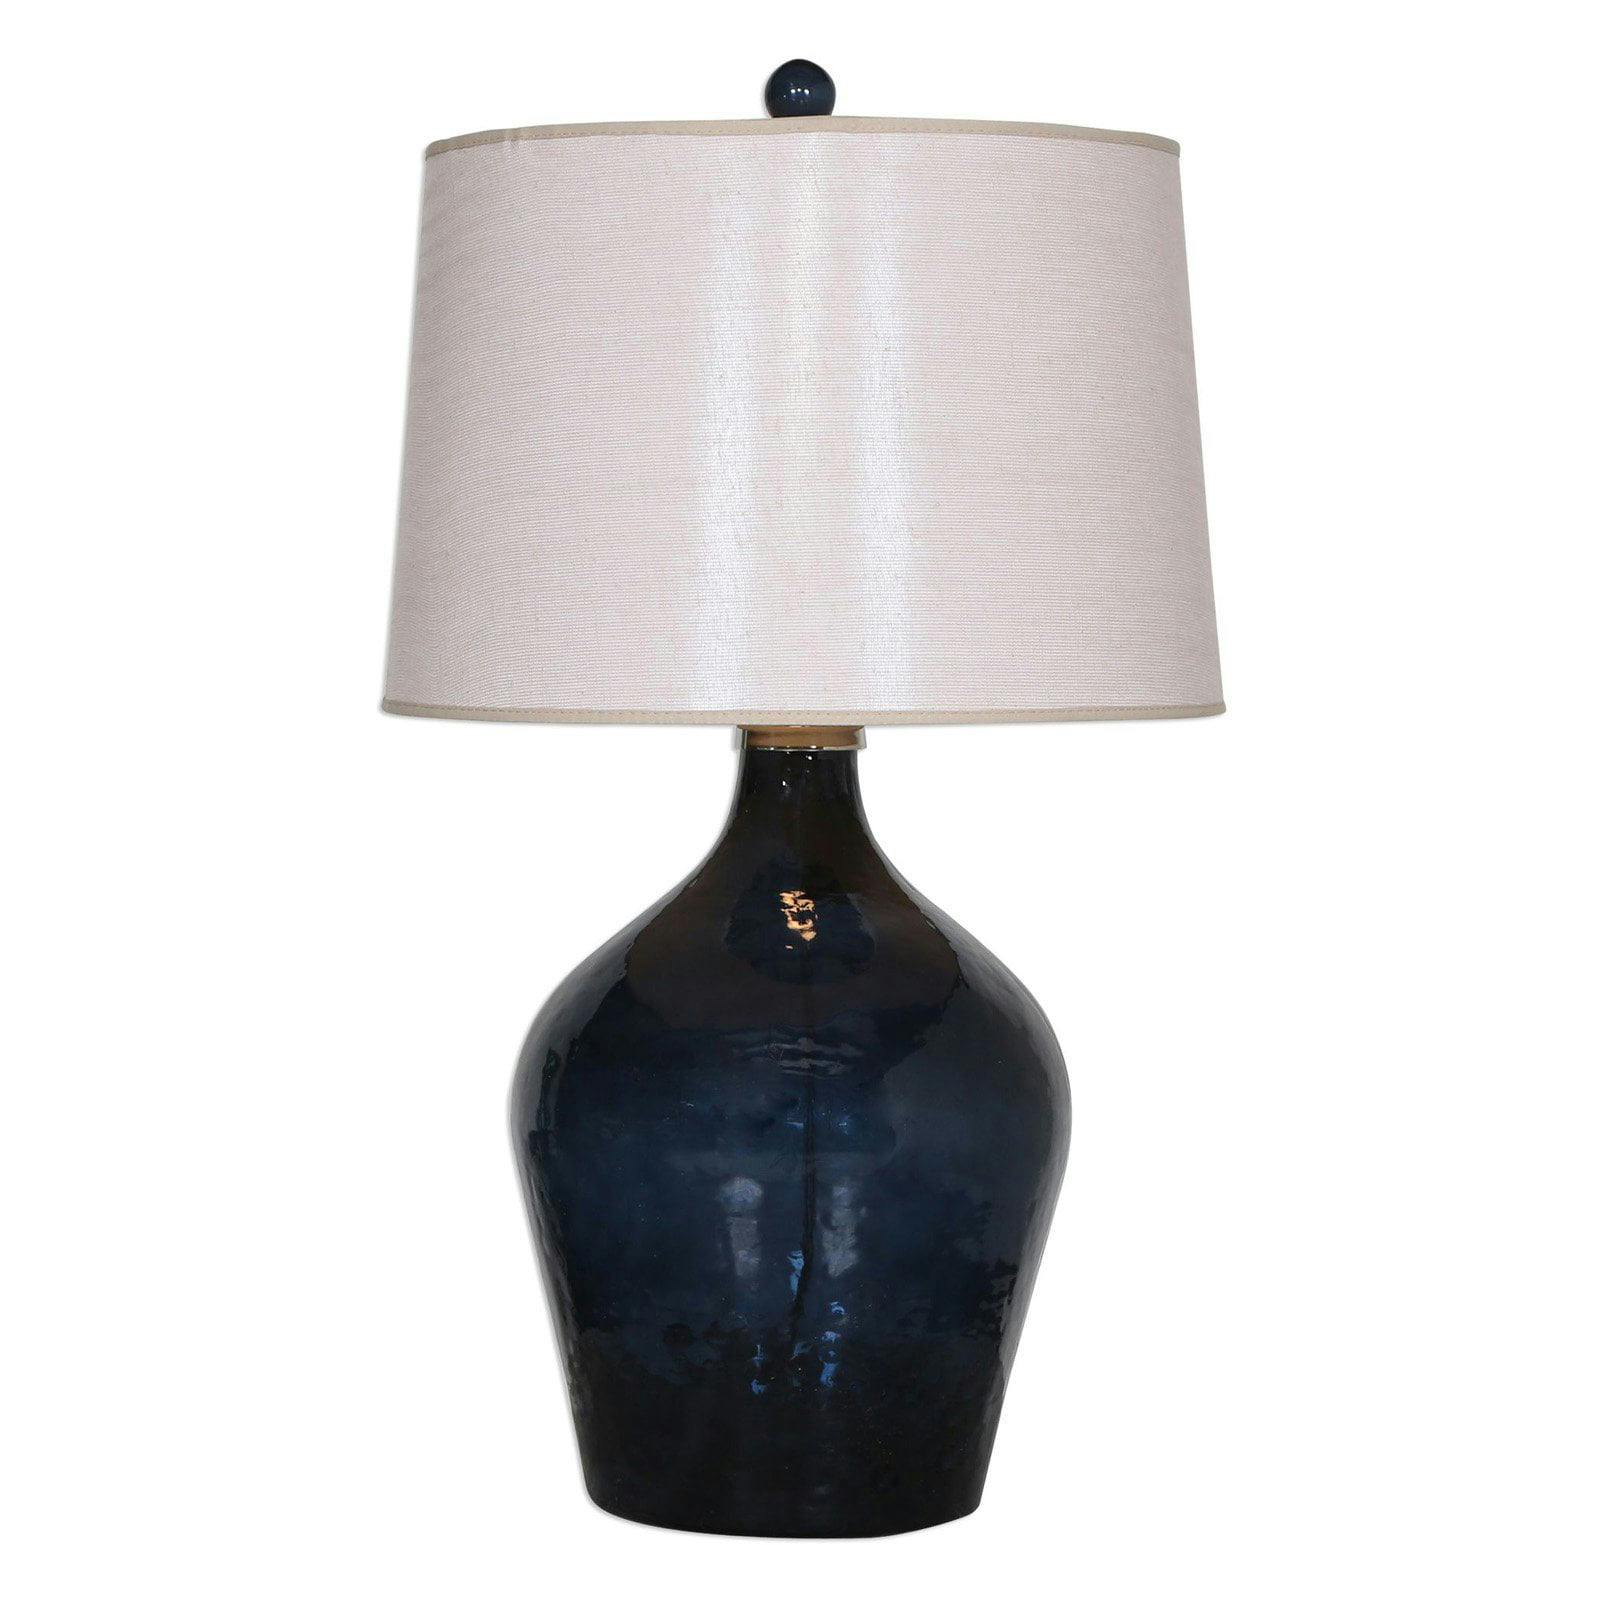 Midnight Blue Hammered Glass Table Lamp with Tapered Shade